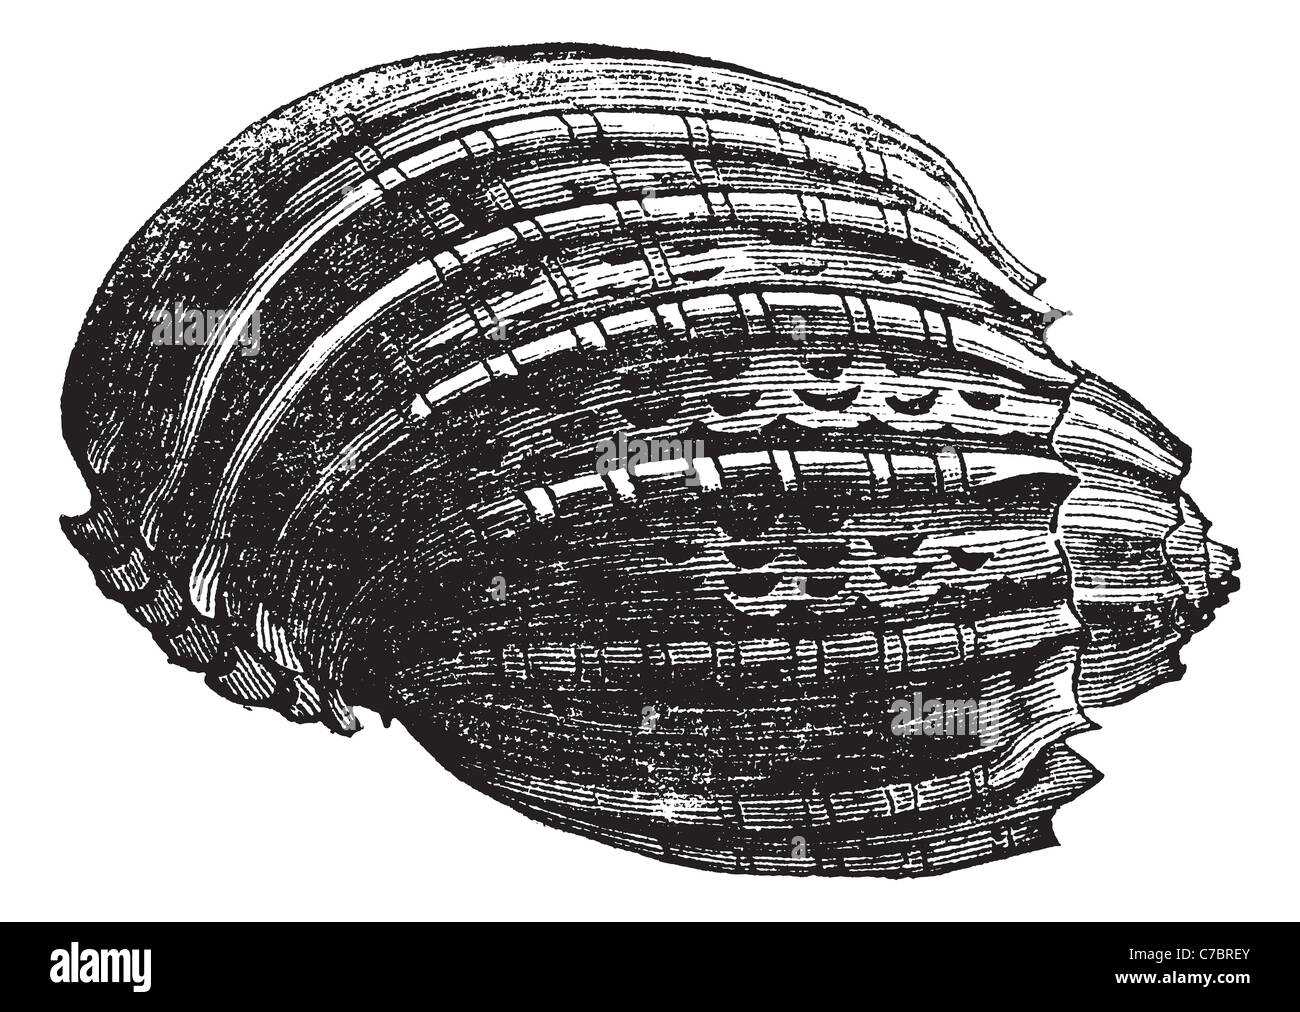 Harp (harp ventriculata) vintage engraving. Old engraved illustration of the harp shell. Stock Photo